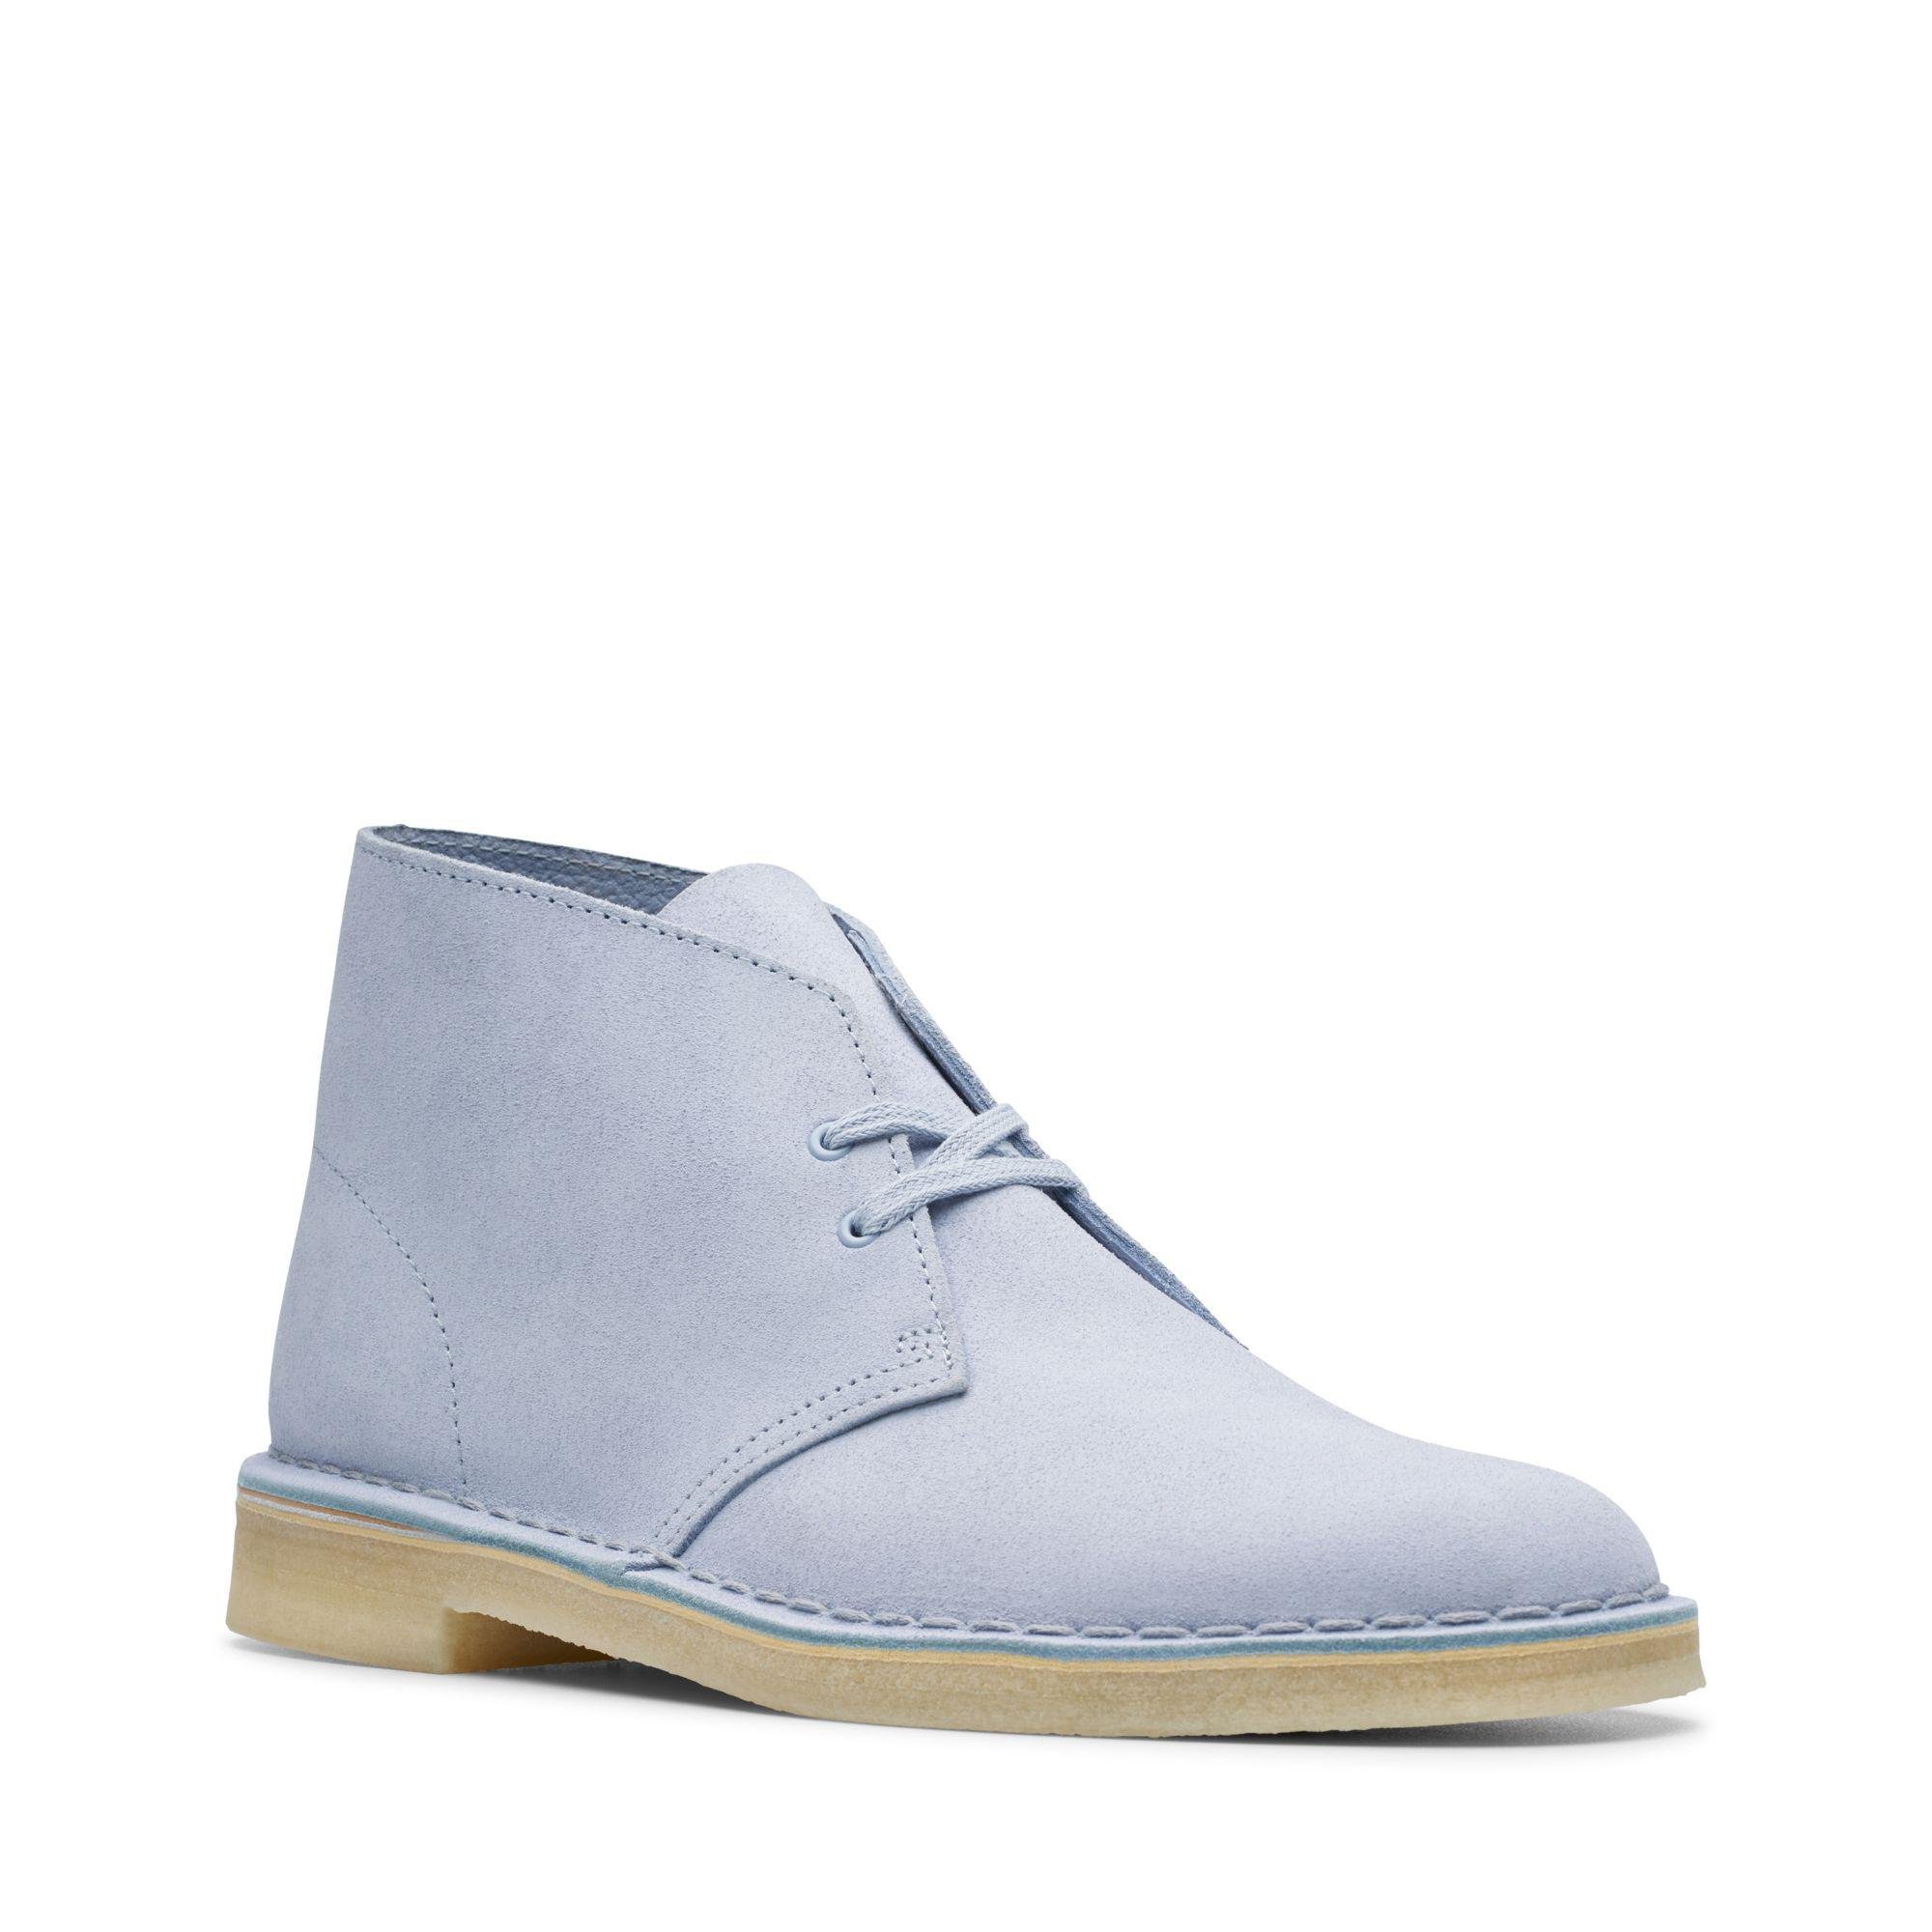 Clarks Suede Desert Boot in Cool Blue 